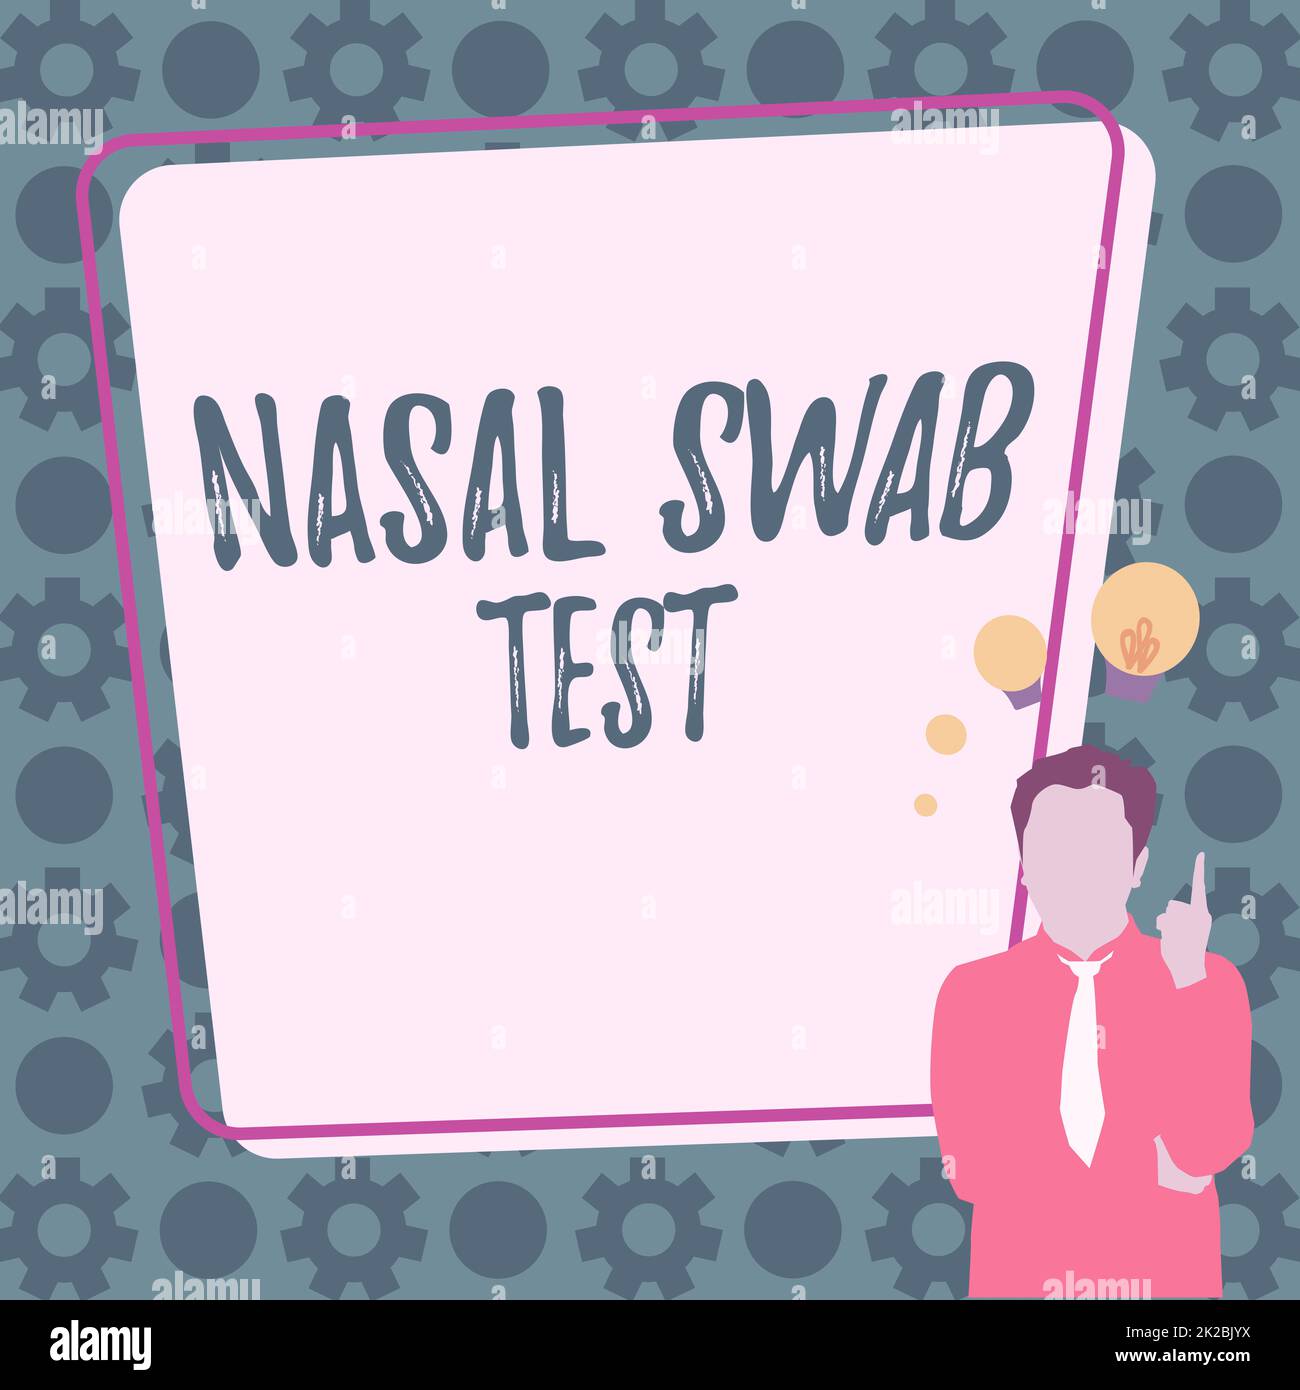 Text caption presenting Nasal Swab Test, Business approach diagnosing an upper respiratory tract infection through nasal secretion Illustration Of A B Stock Photo